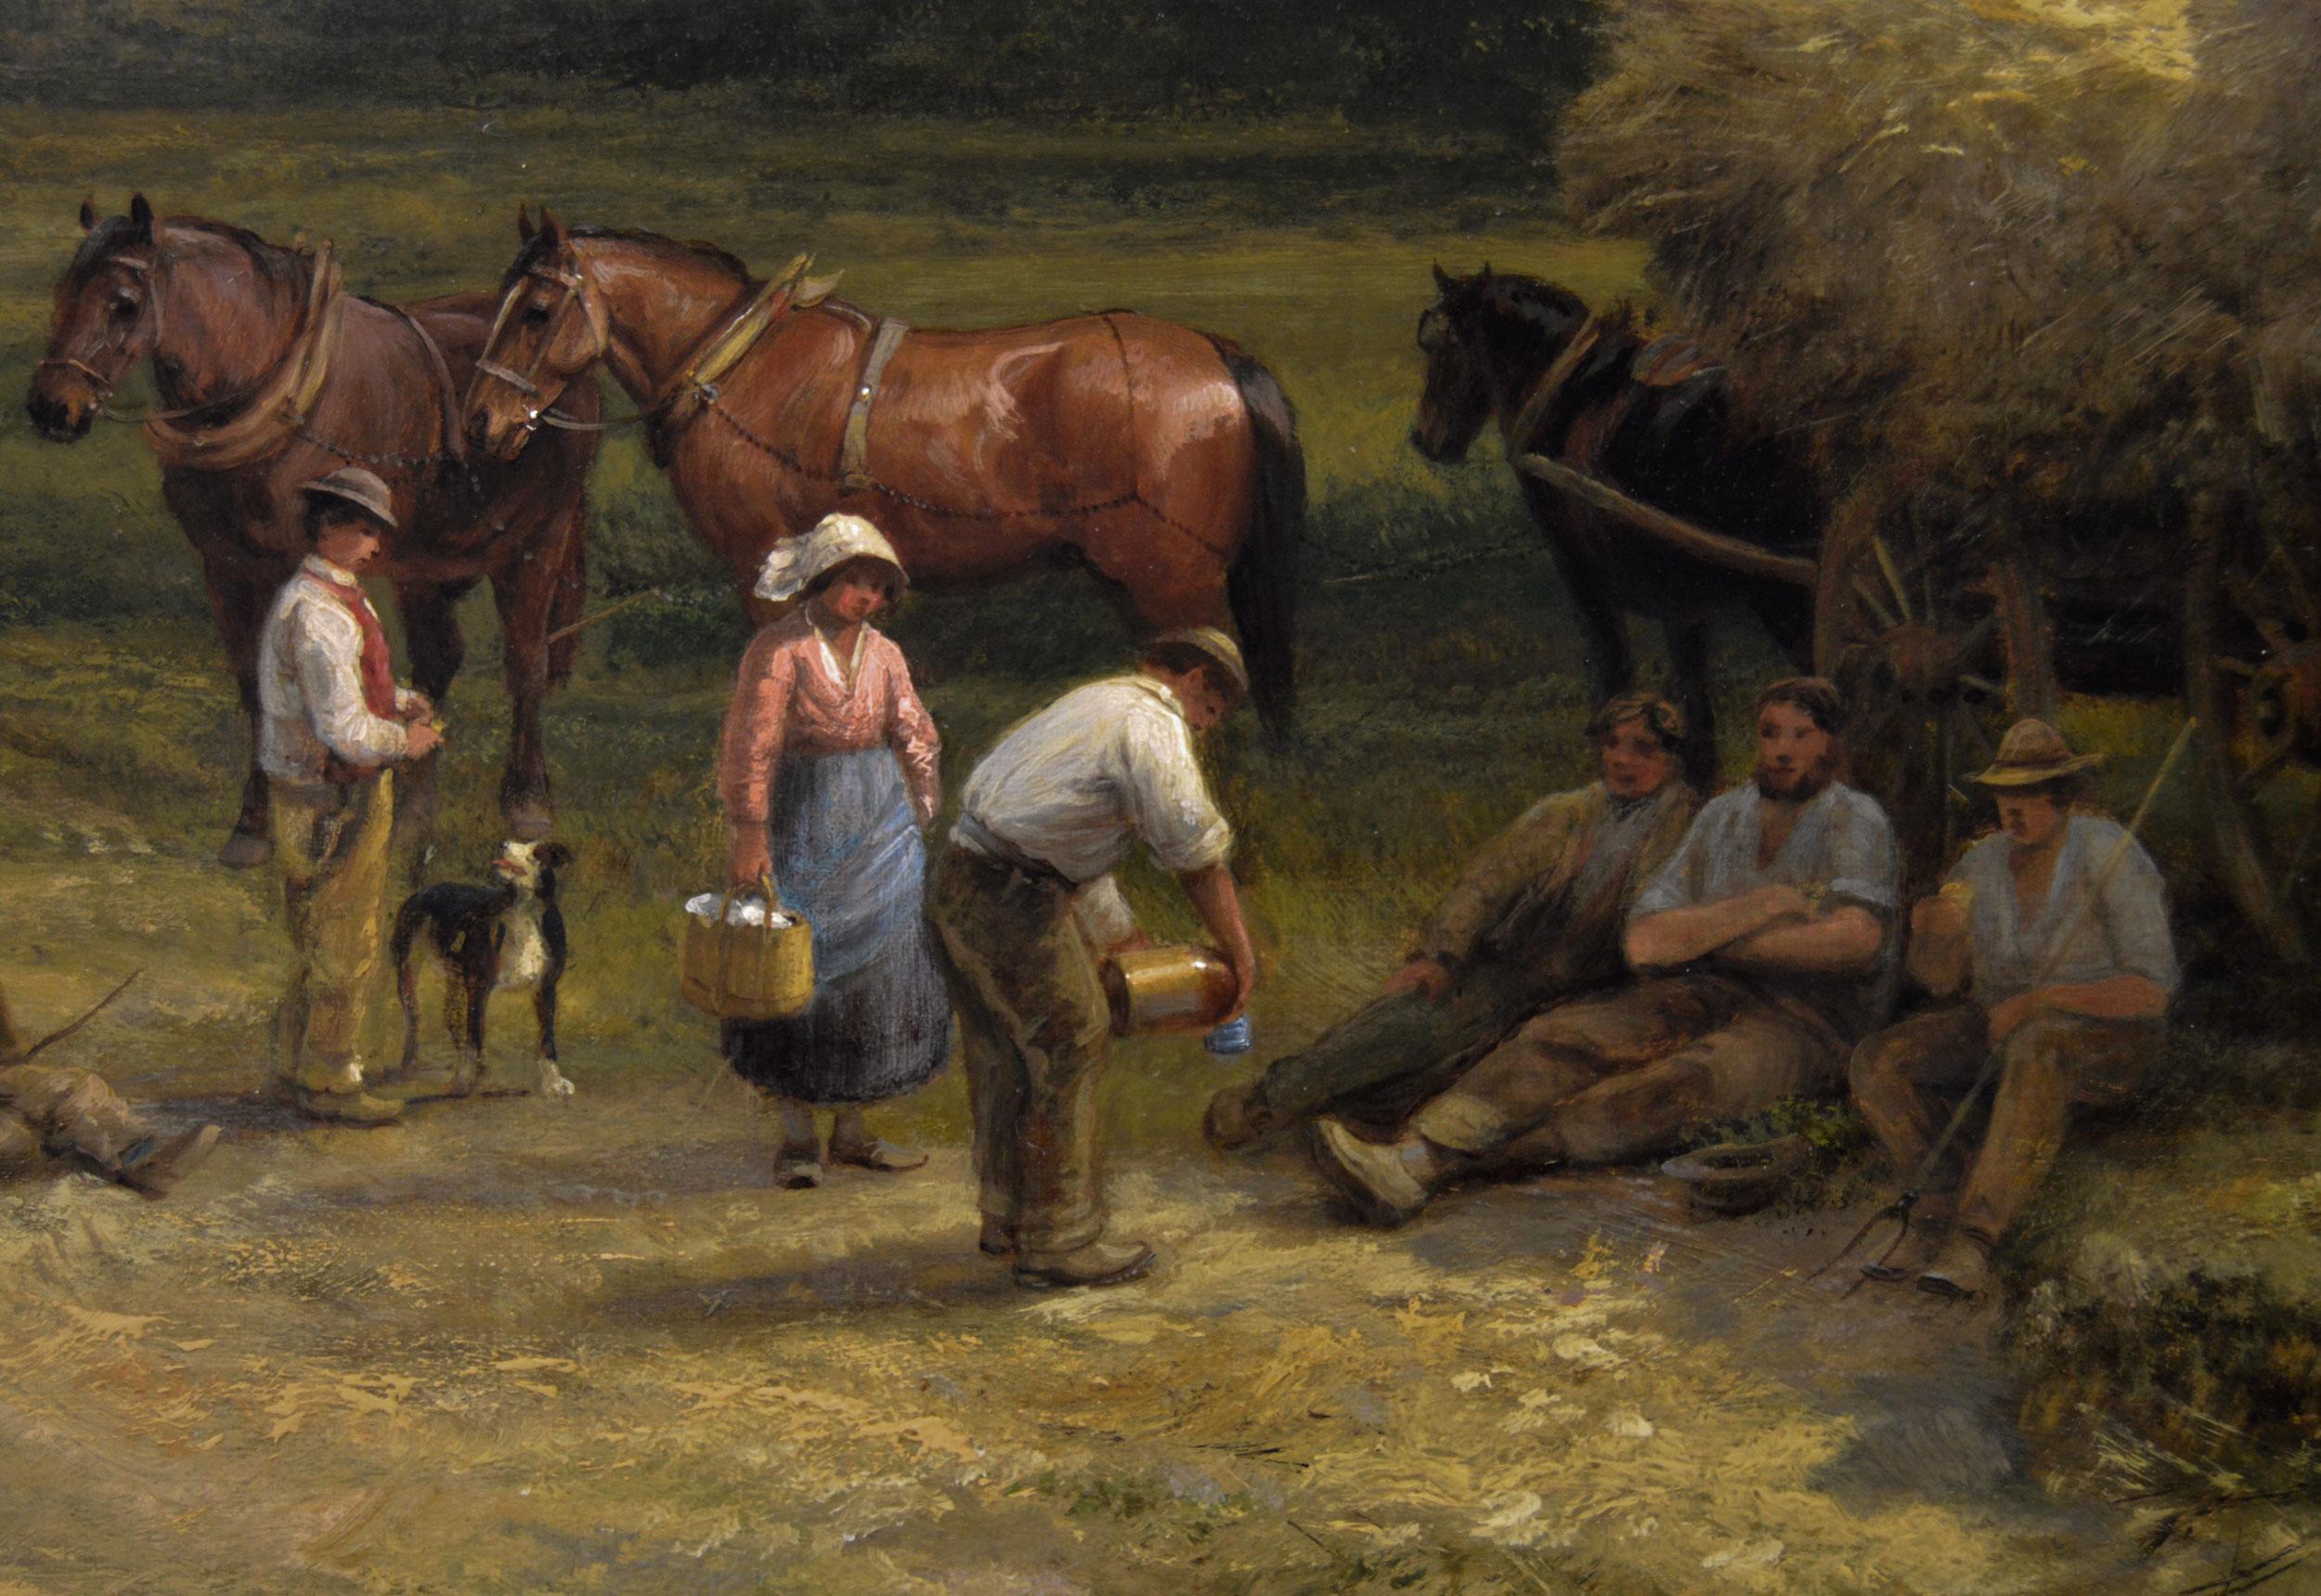 George Cole
British, (1810-1883)
Rick Making, Lunchtime
Oil on canvas, signed & dated 1883
Image size: 23.5 inches x 35.5 inches
Size including frame: 30.5 inches x 42.5 inches
Provenance: Richard Green, 4 New Bond Street, London

A wonderful